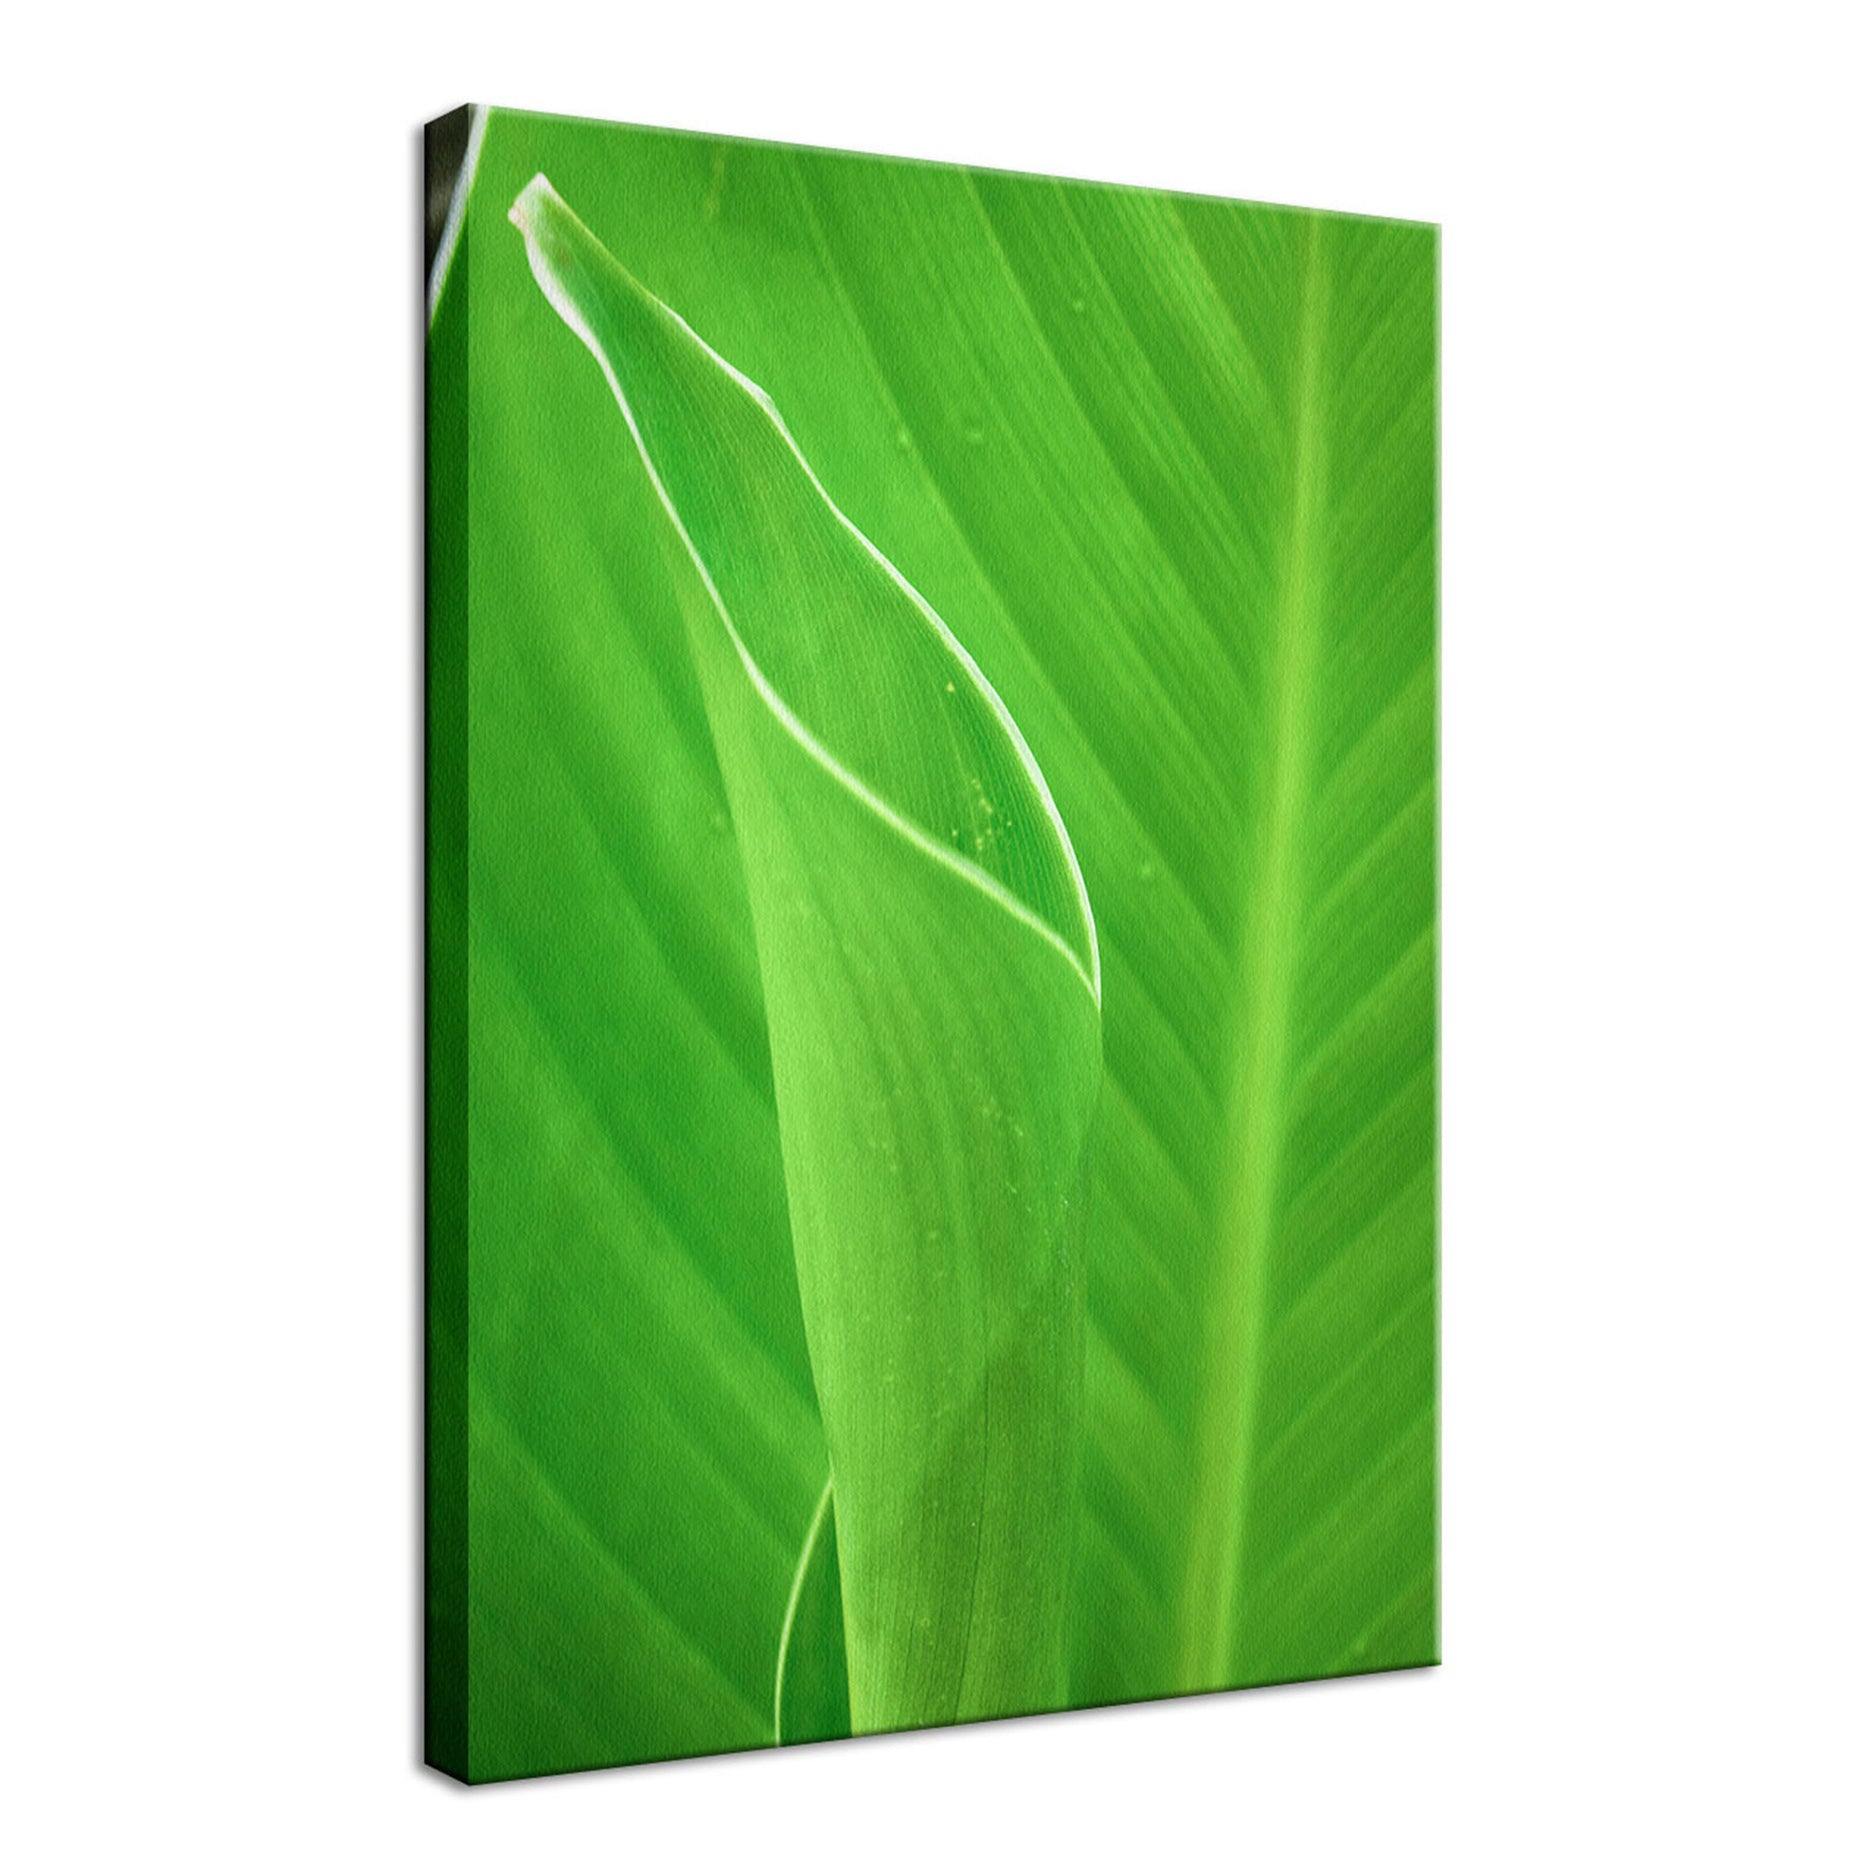 Leaves Canna Lily Plant Nature / Botanical Photo Fine Art Canvas Wall Art Prints  - PIPAFINEART